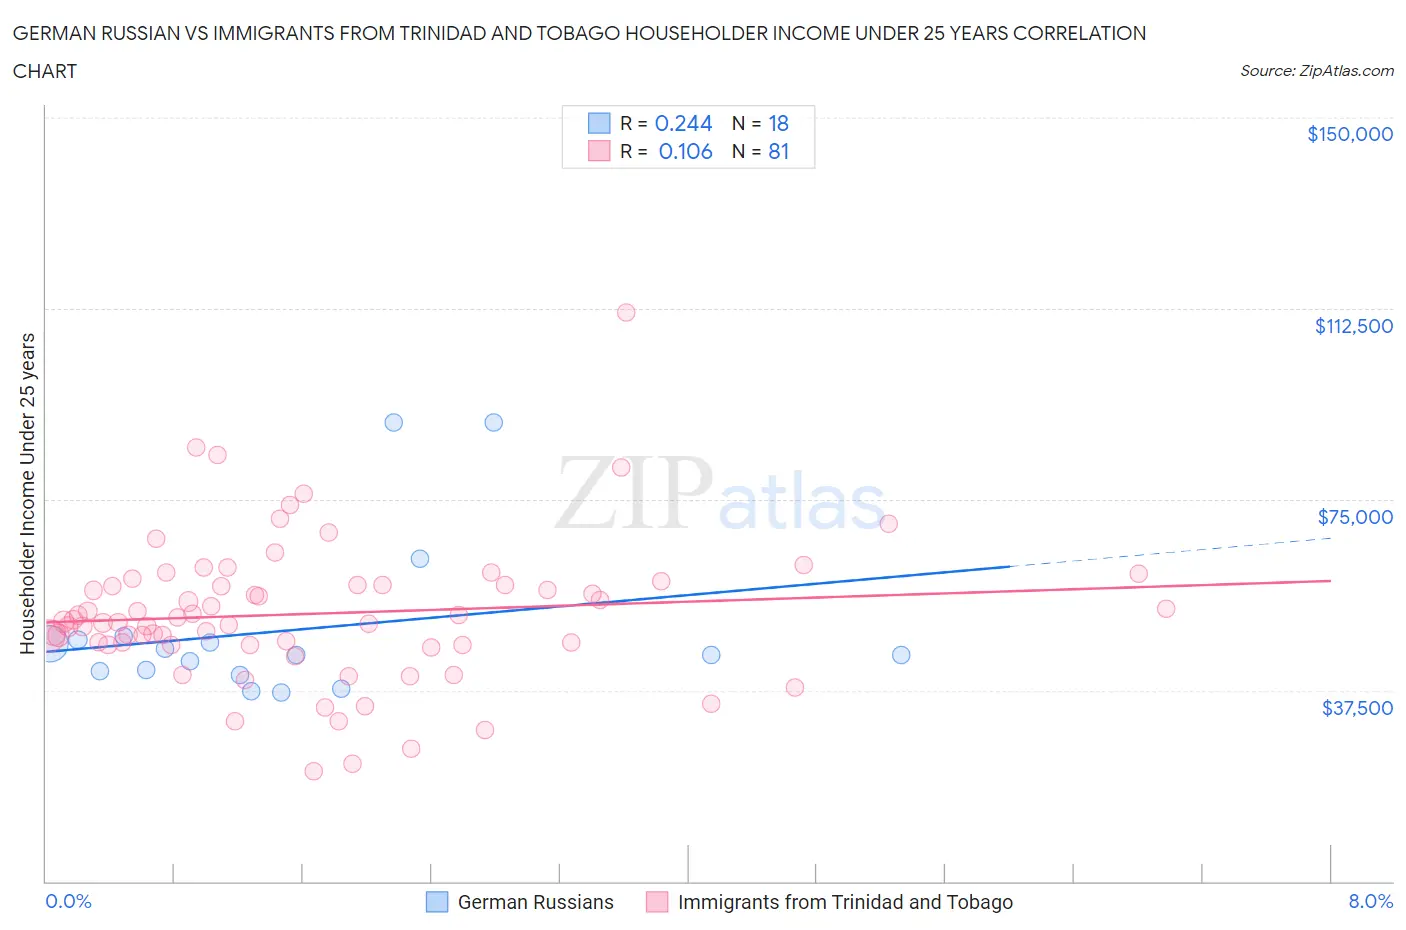 German Russian vs Immigrants from Trinidad and Tobago Householder Income Under 25 years